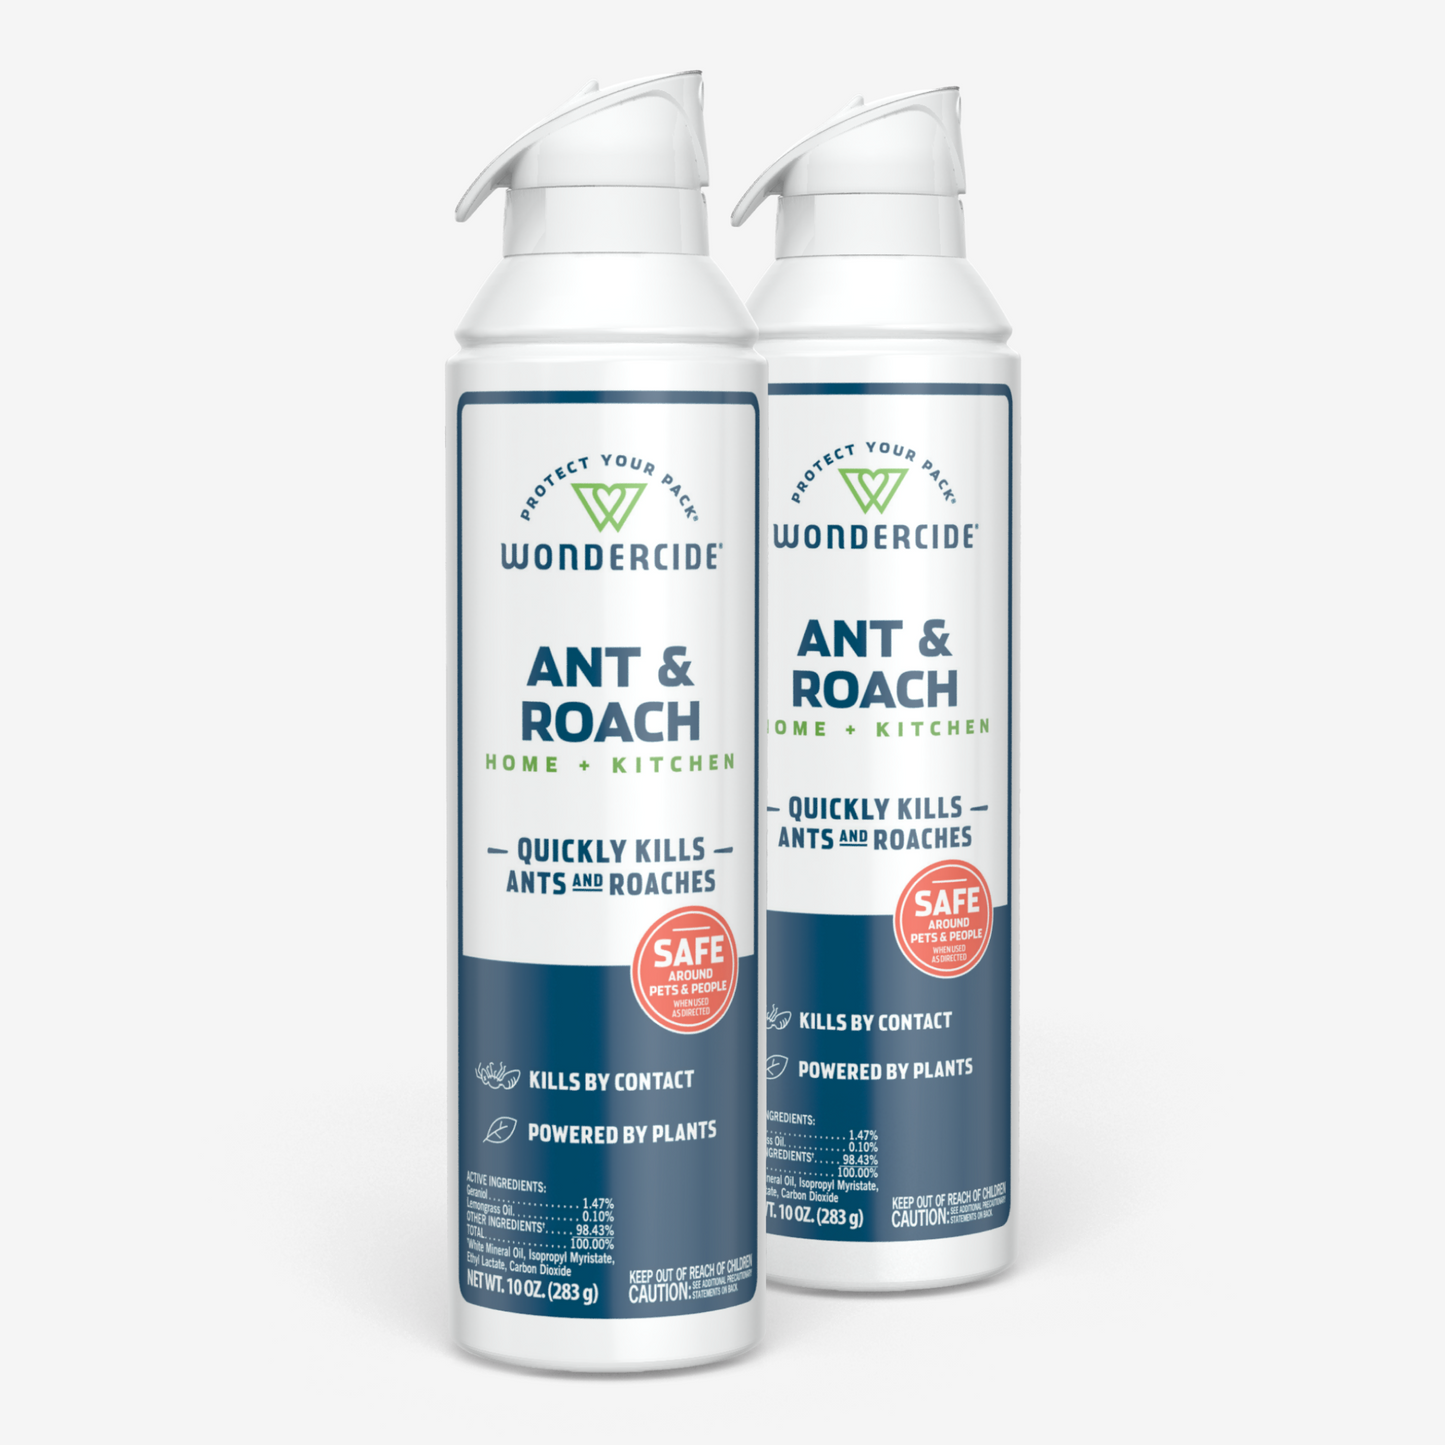  Wondercide - Indoor Pest Control Spray for Home and Kitchen -  Ant, Roach, Spider, Fly, Flea, Bug Killer and Insect Repellent - with  Natural Essential Oils - Pet and Family Safe —